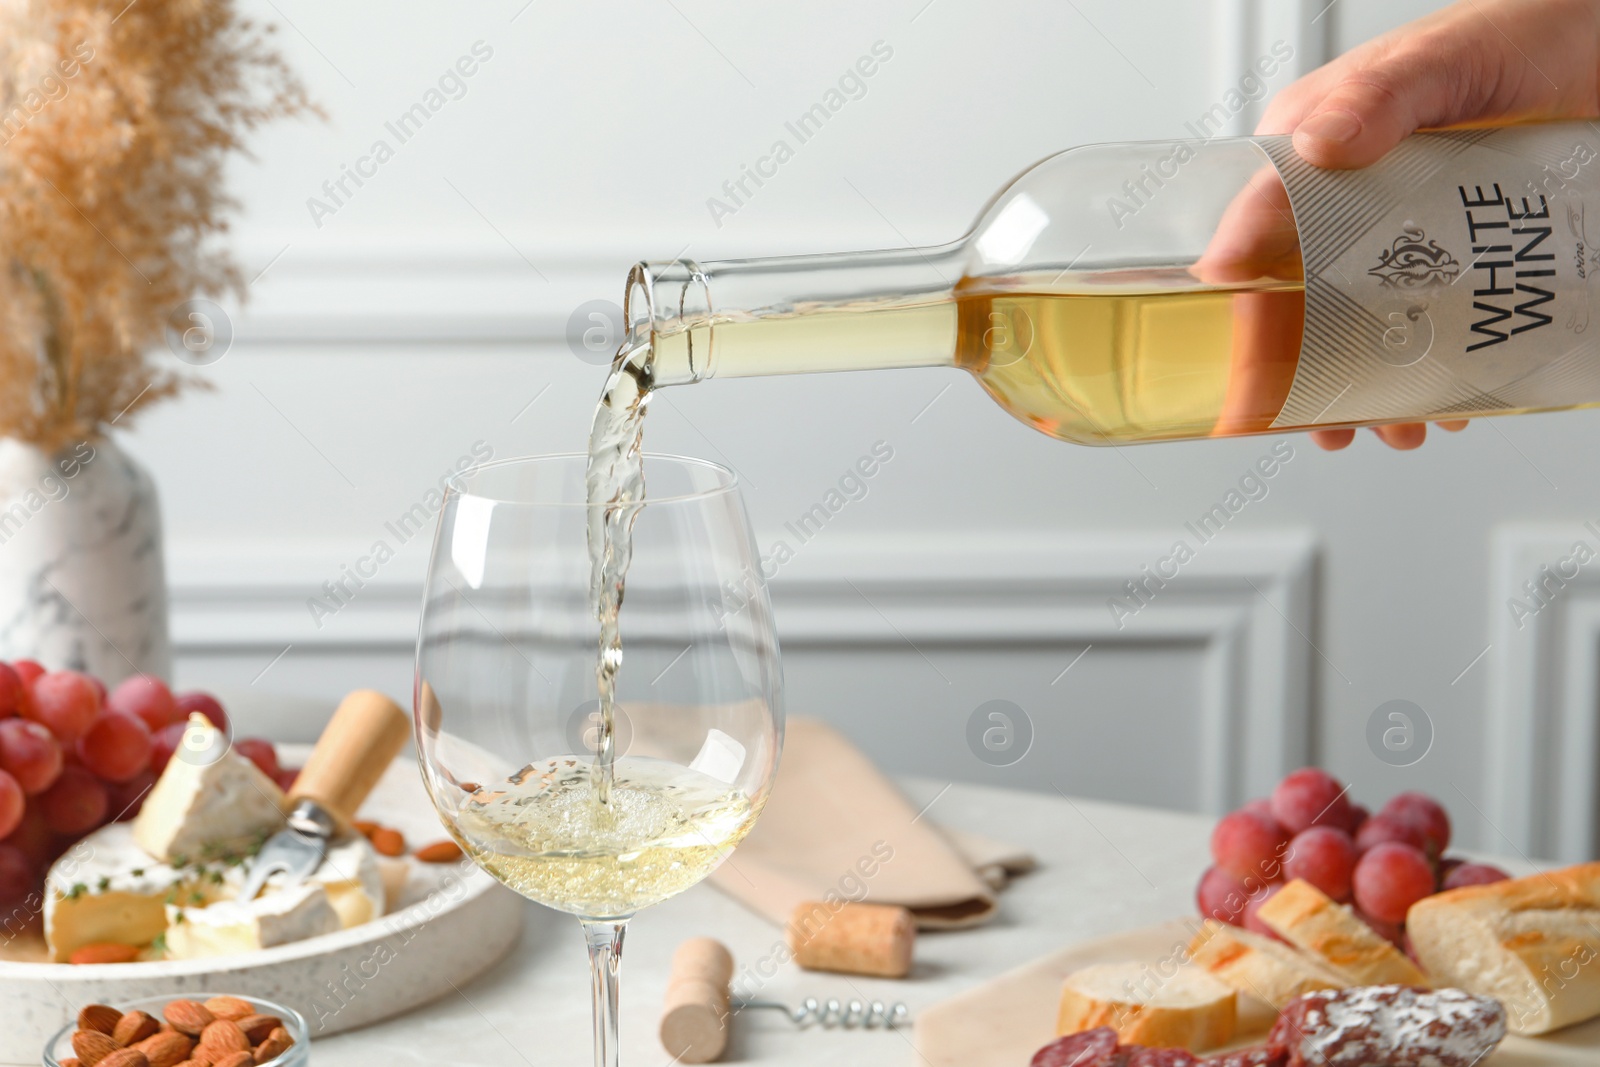 Photo of Woman pouring white wine from bottle into glass at table with snacks, closeup